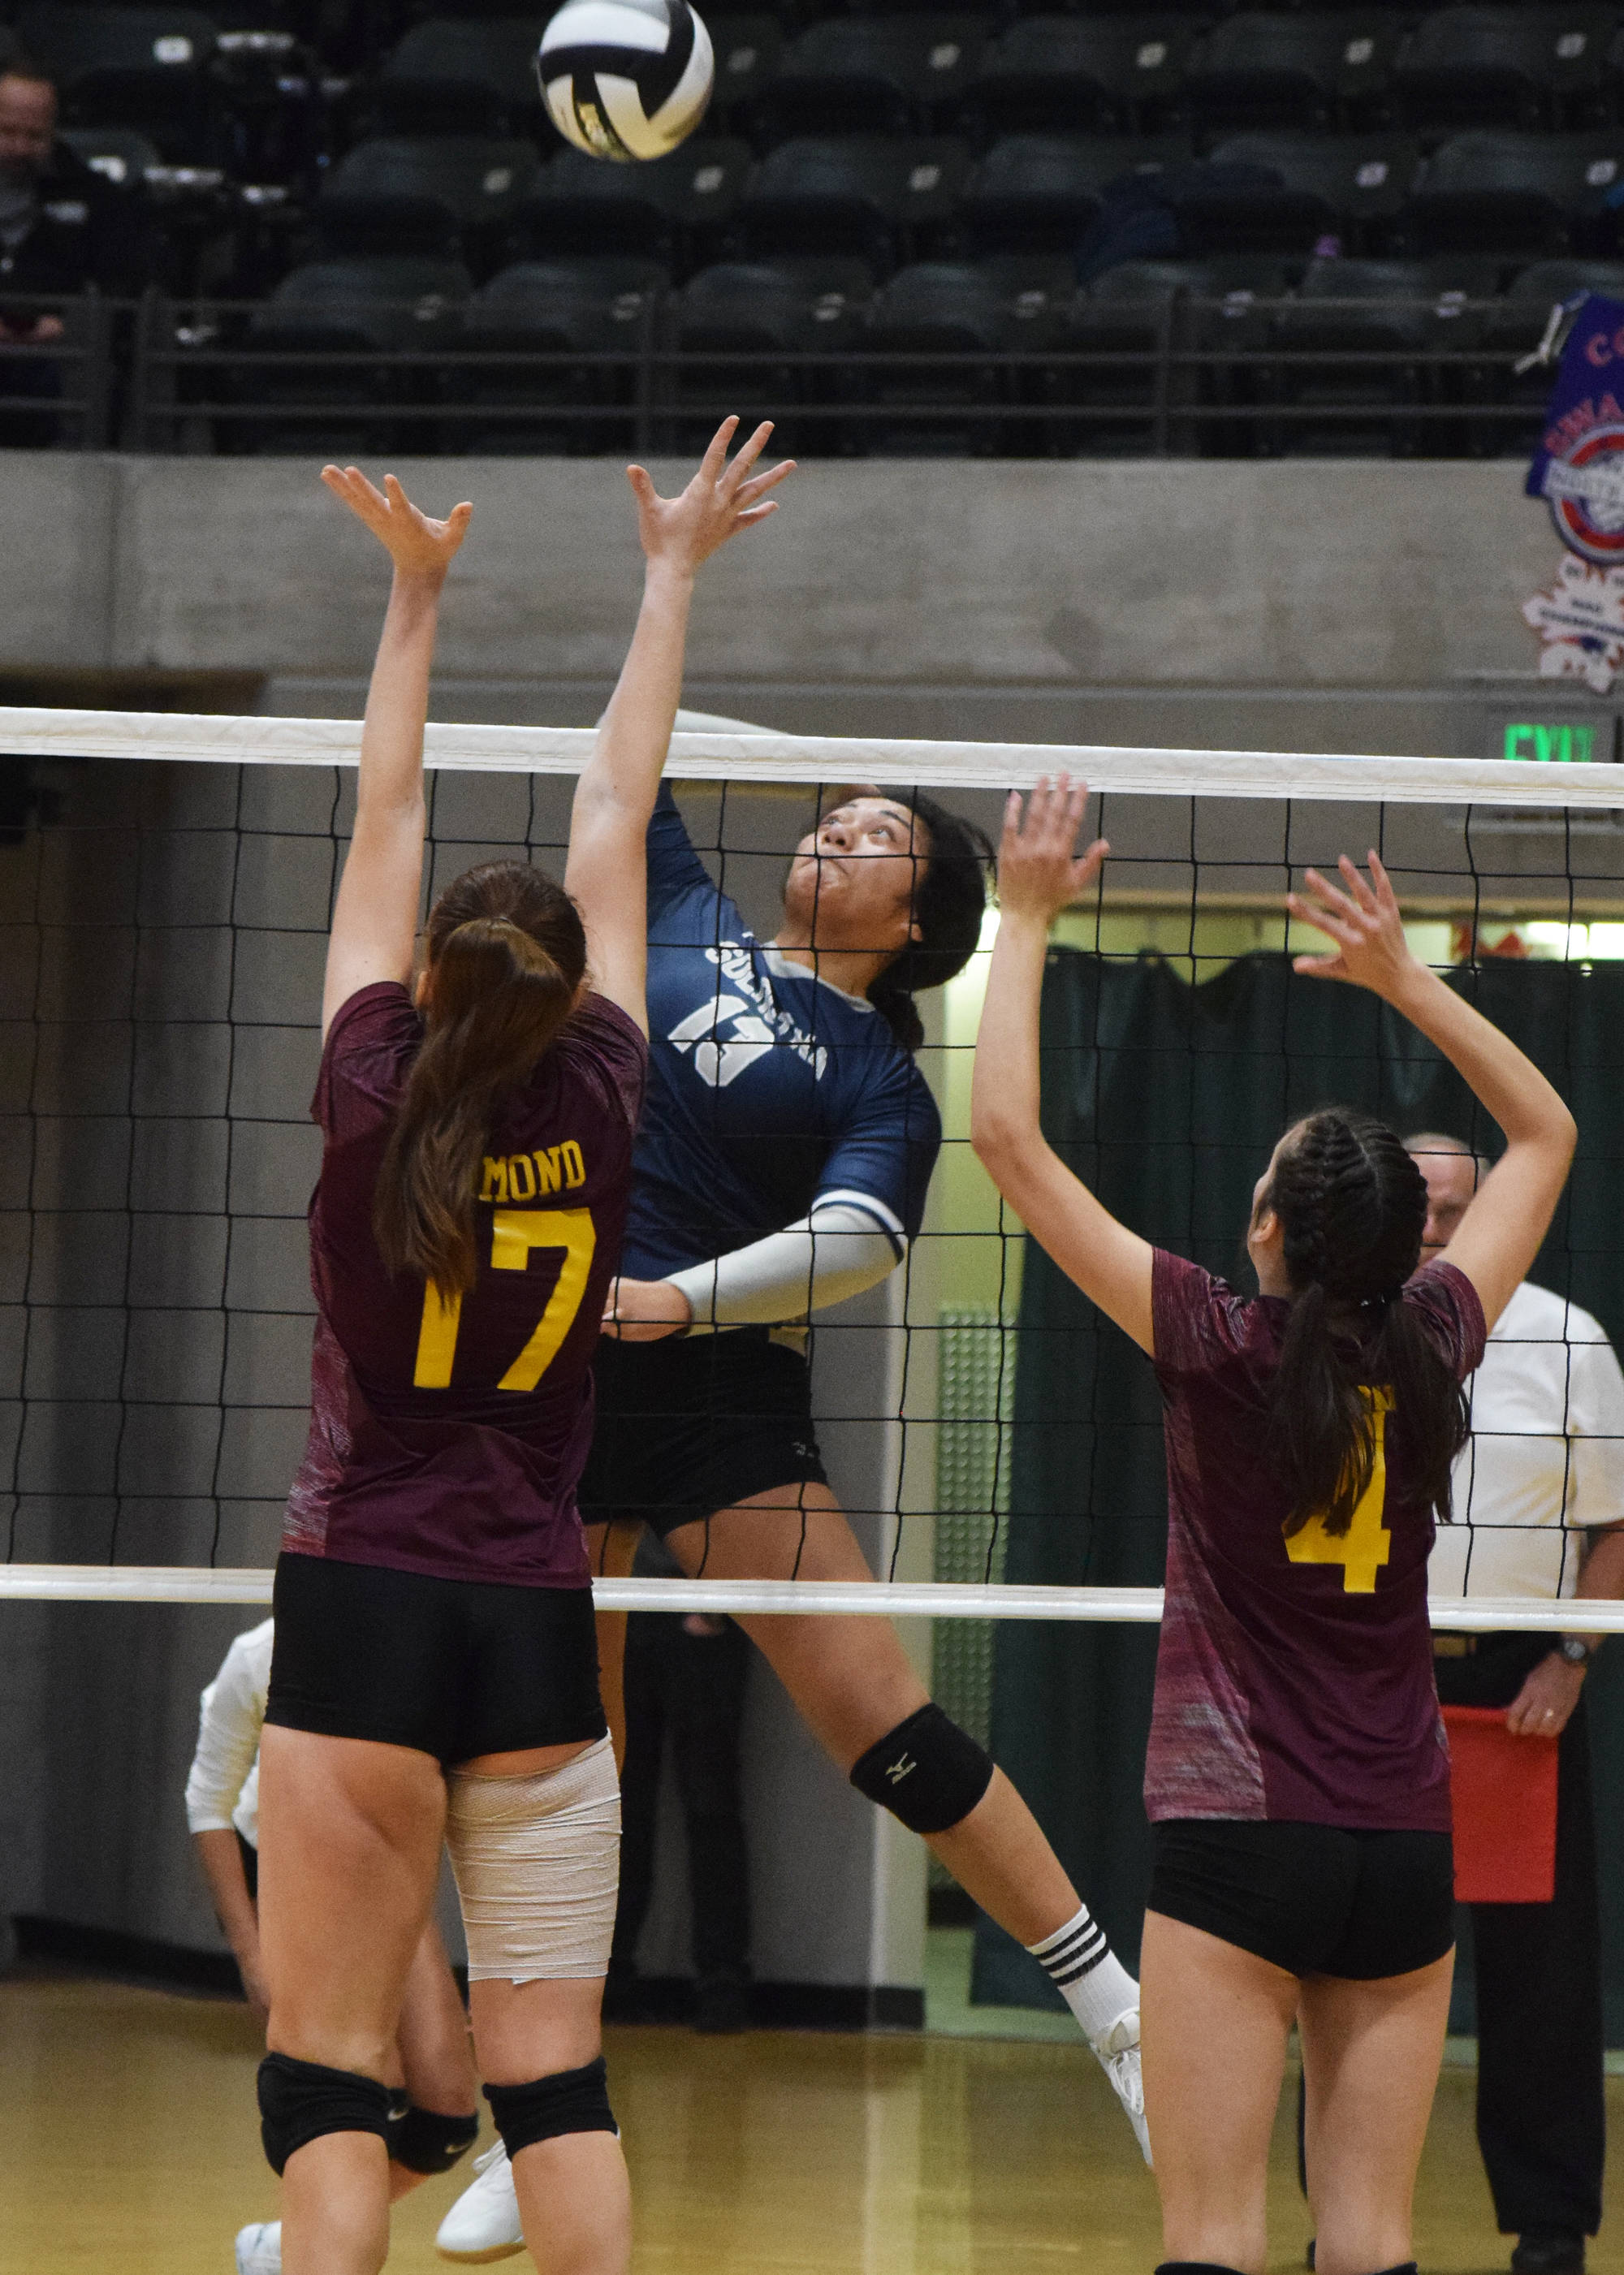 Soldotna’s Ituau Tuisaula sends a ball over Dimond’s Kimberly Roth (left) and Kadyn Osborne, Thursday, Nov. 14, 2019, at the Class 4A state volleyball tournament at the Alaska Airlines Center in Anchorage, Alaska. (Photo by Joey Klecka/Peninsula Clarion)